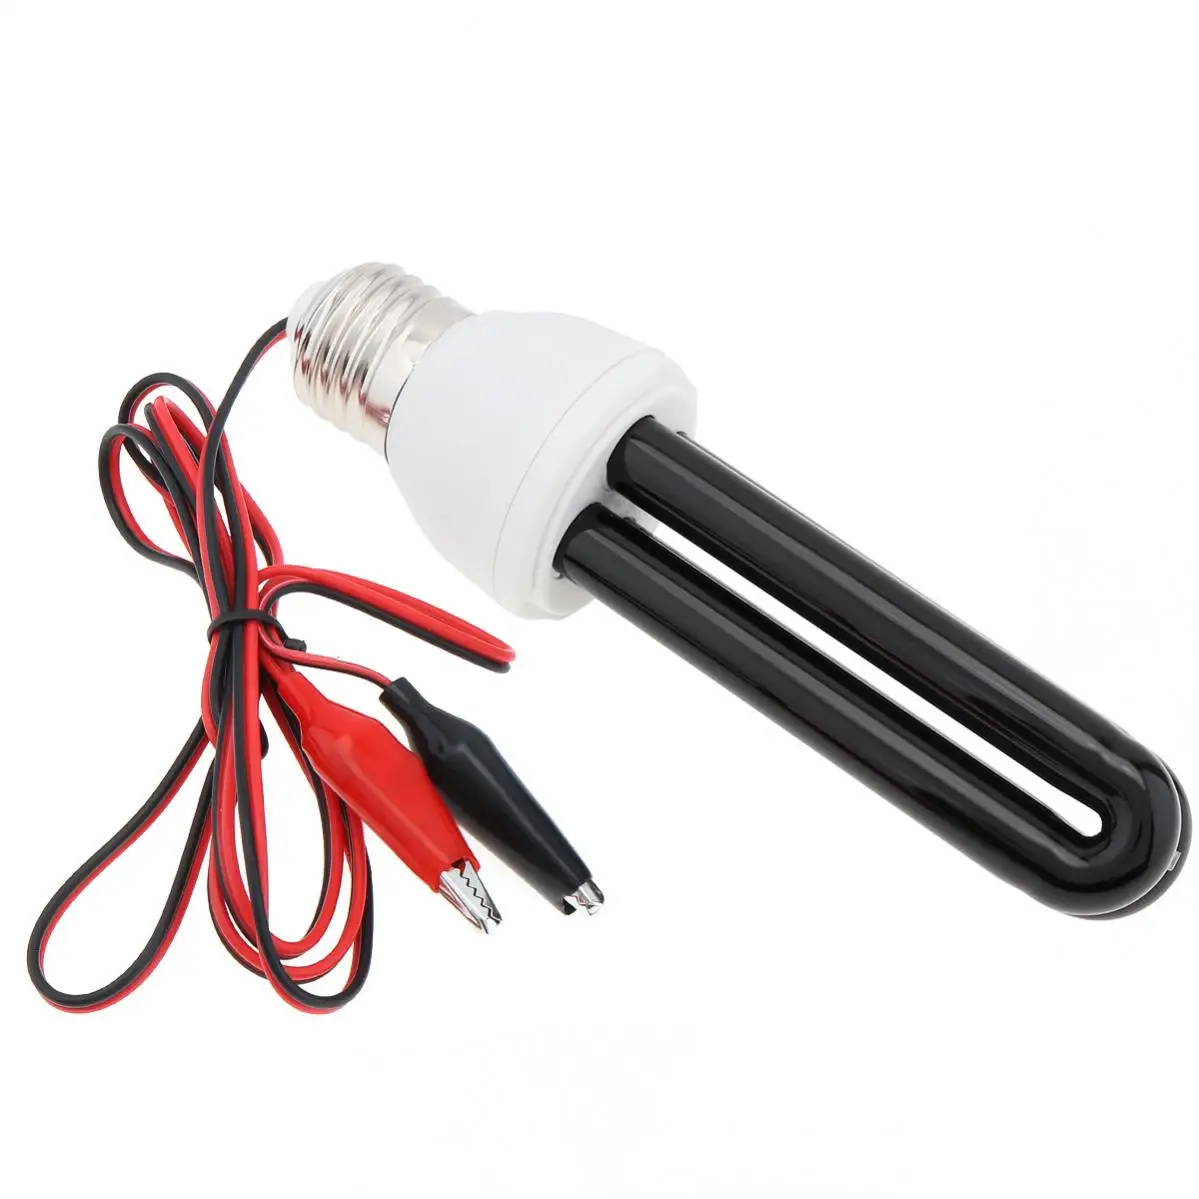 20/30/40W UV Black Light Attracting Insects Lamp CFL Farming Lights 365NM 12V Ultraviolet Lamp Trap Light